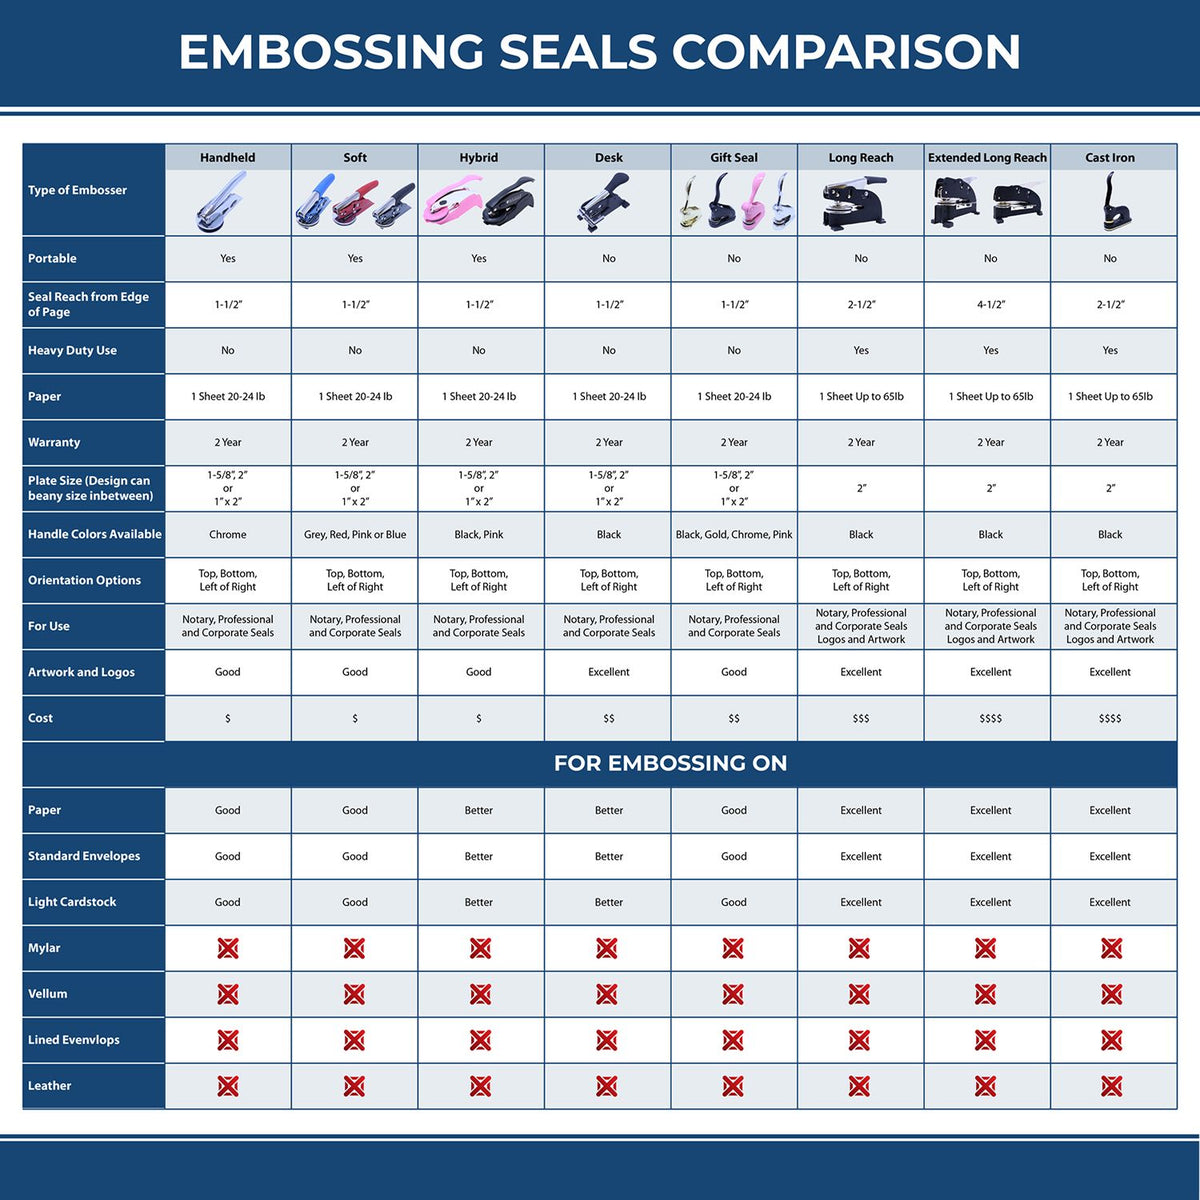 A comparison chart for the different types of mount models available for the Hybrid New Mexico Geologist Seal